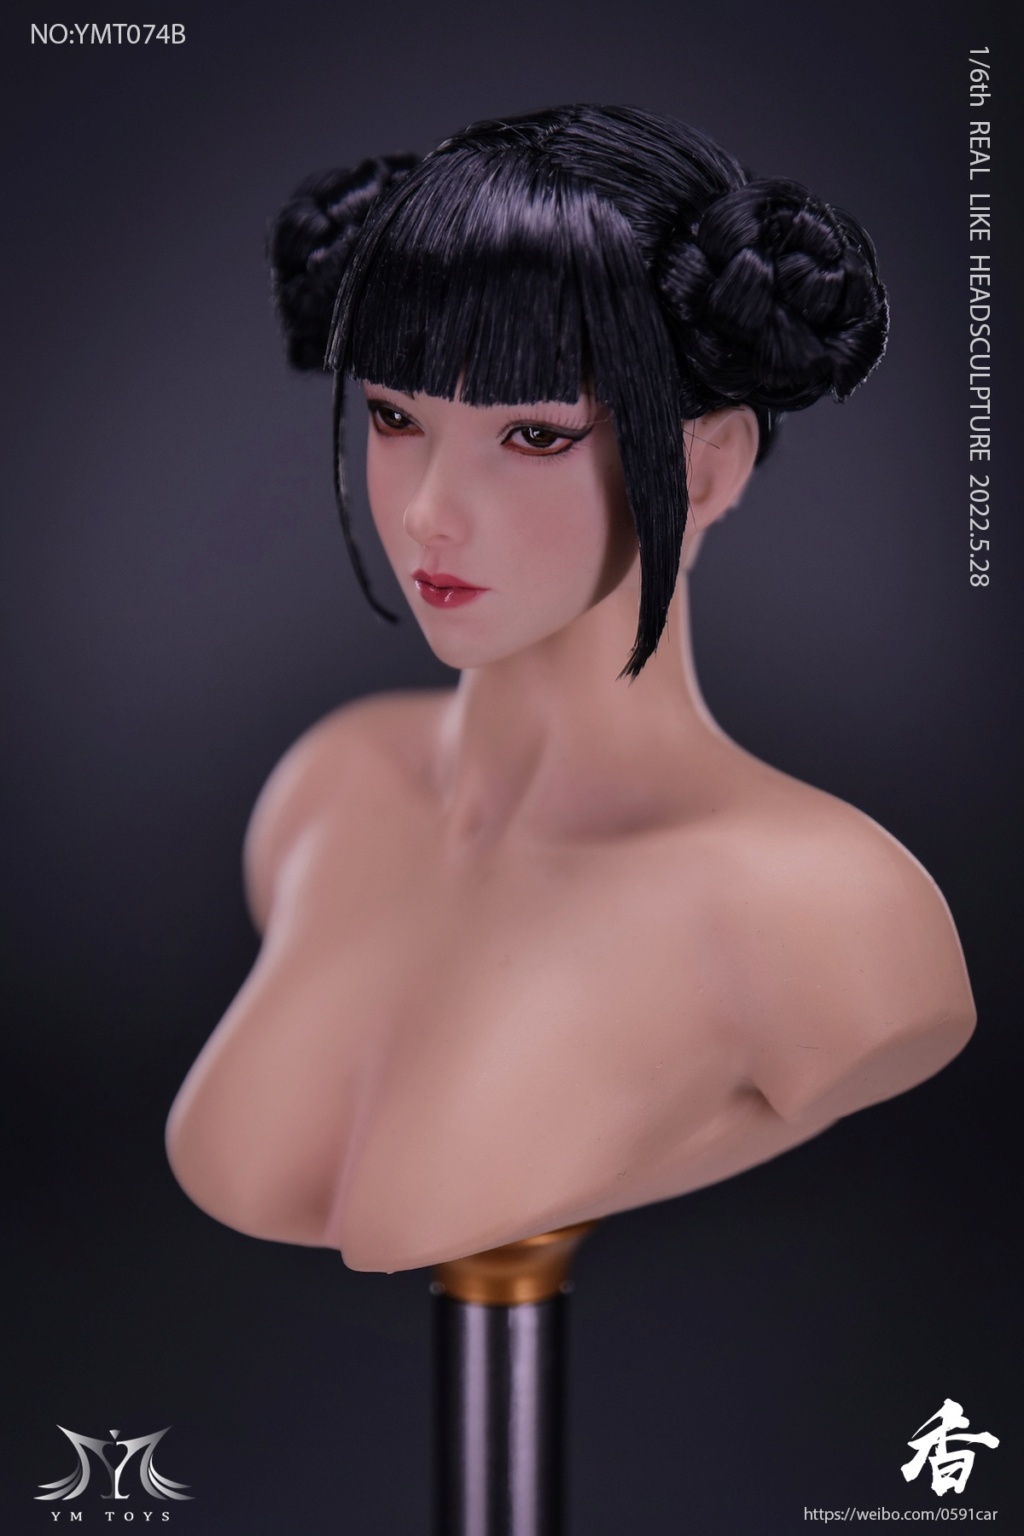 accessory - NEW PRODUCT: YMTOYS: 1/6 YMT074 Cool Female Head Sculpt 14500813